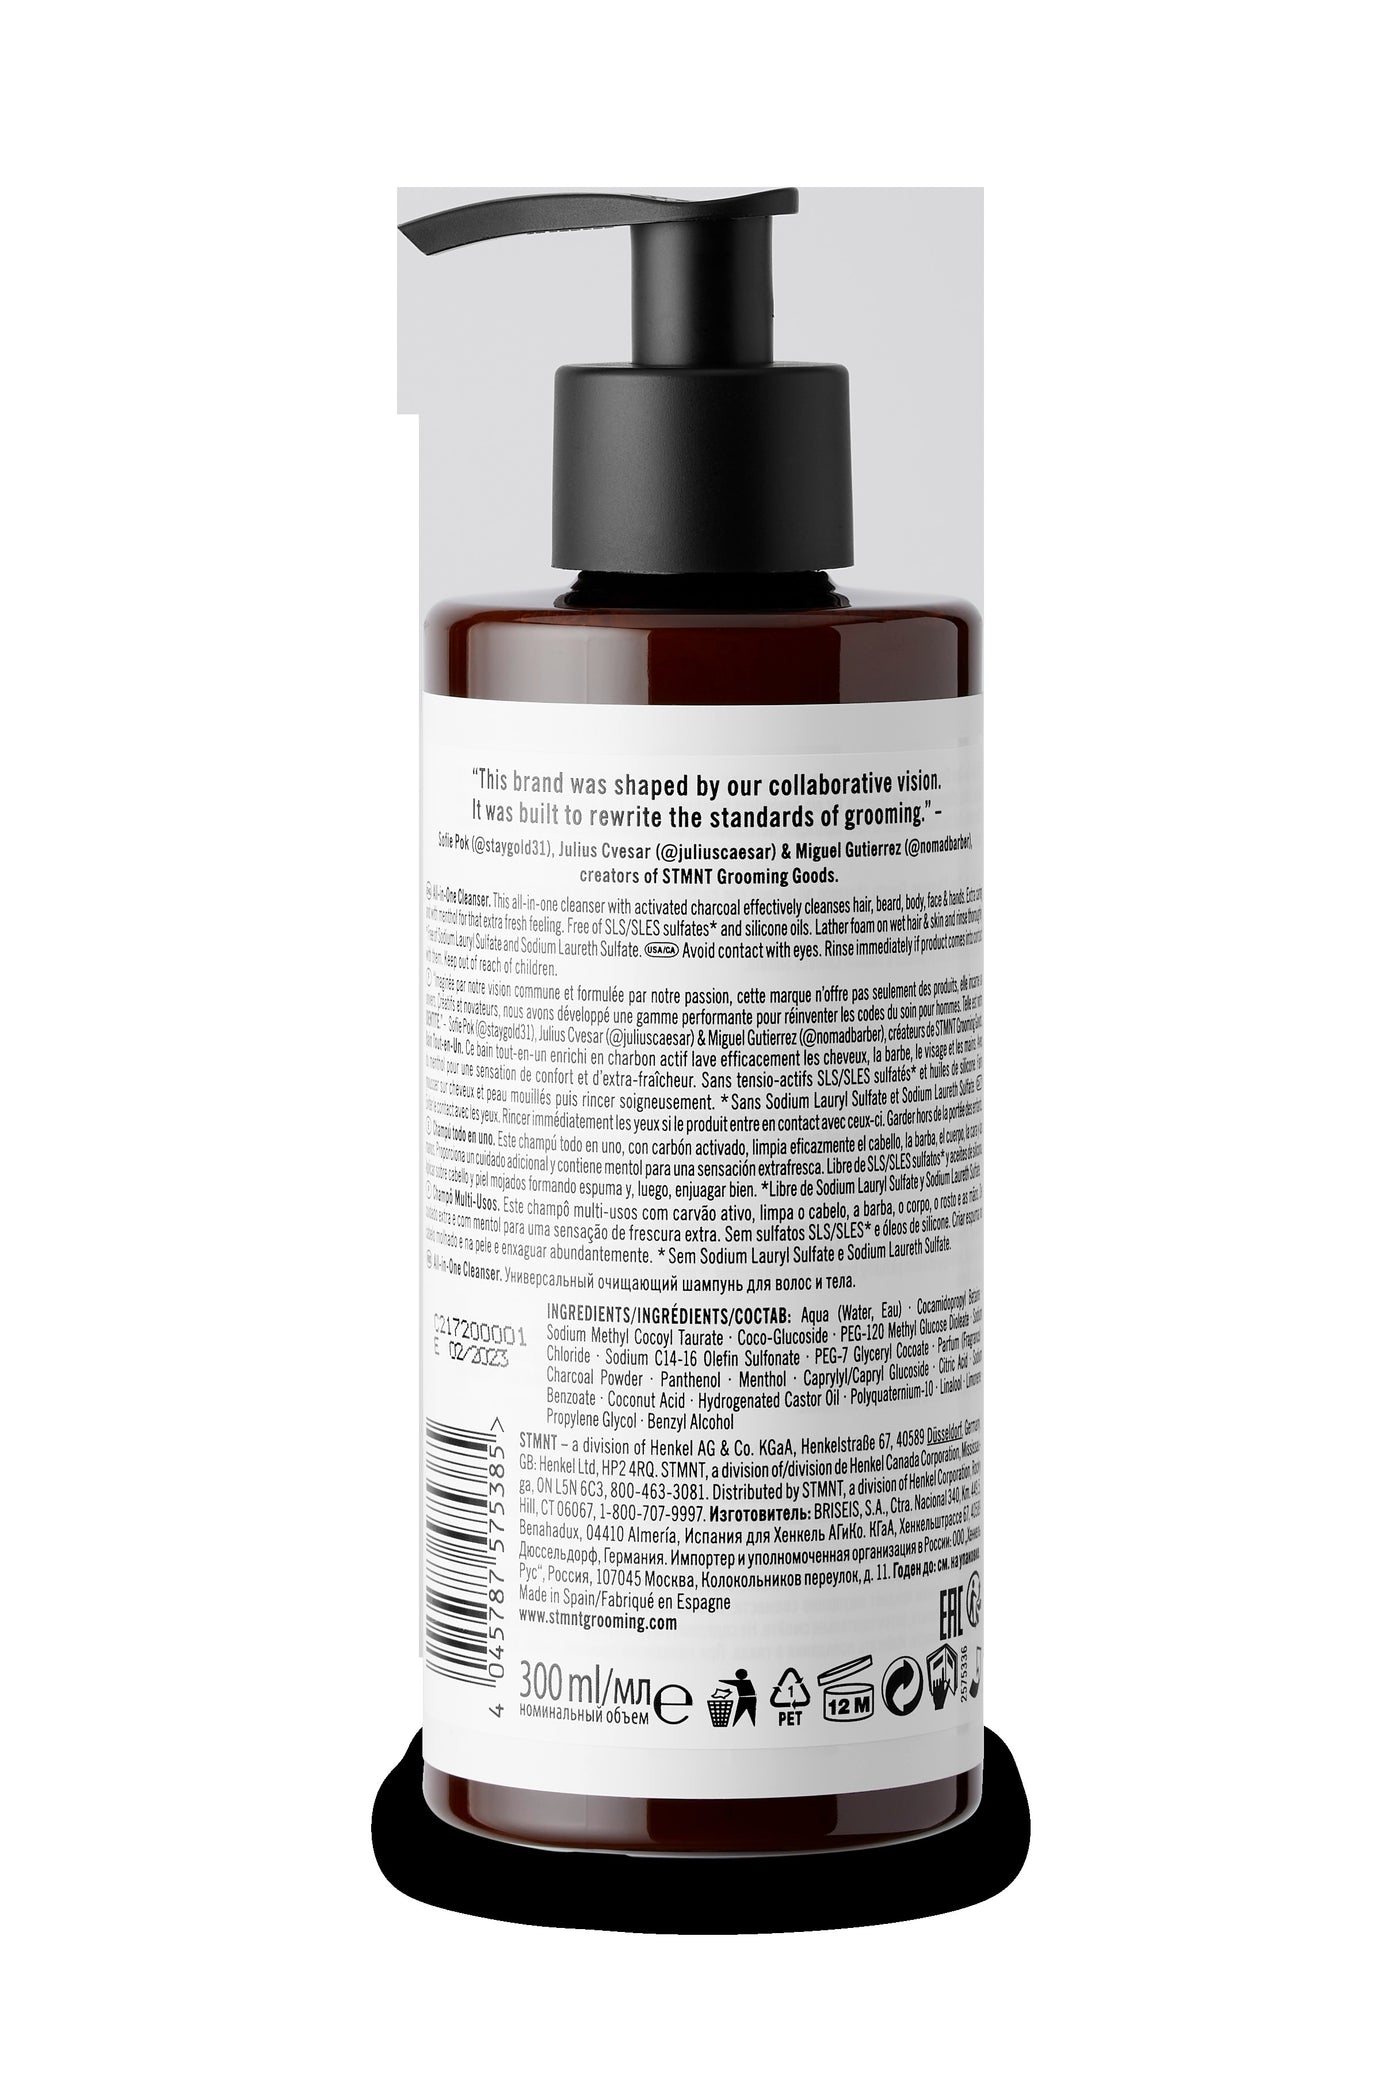 STMNT Grooming Goods All In One Cleanser 300mL - Salon Warehouse